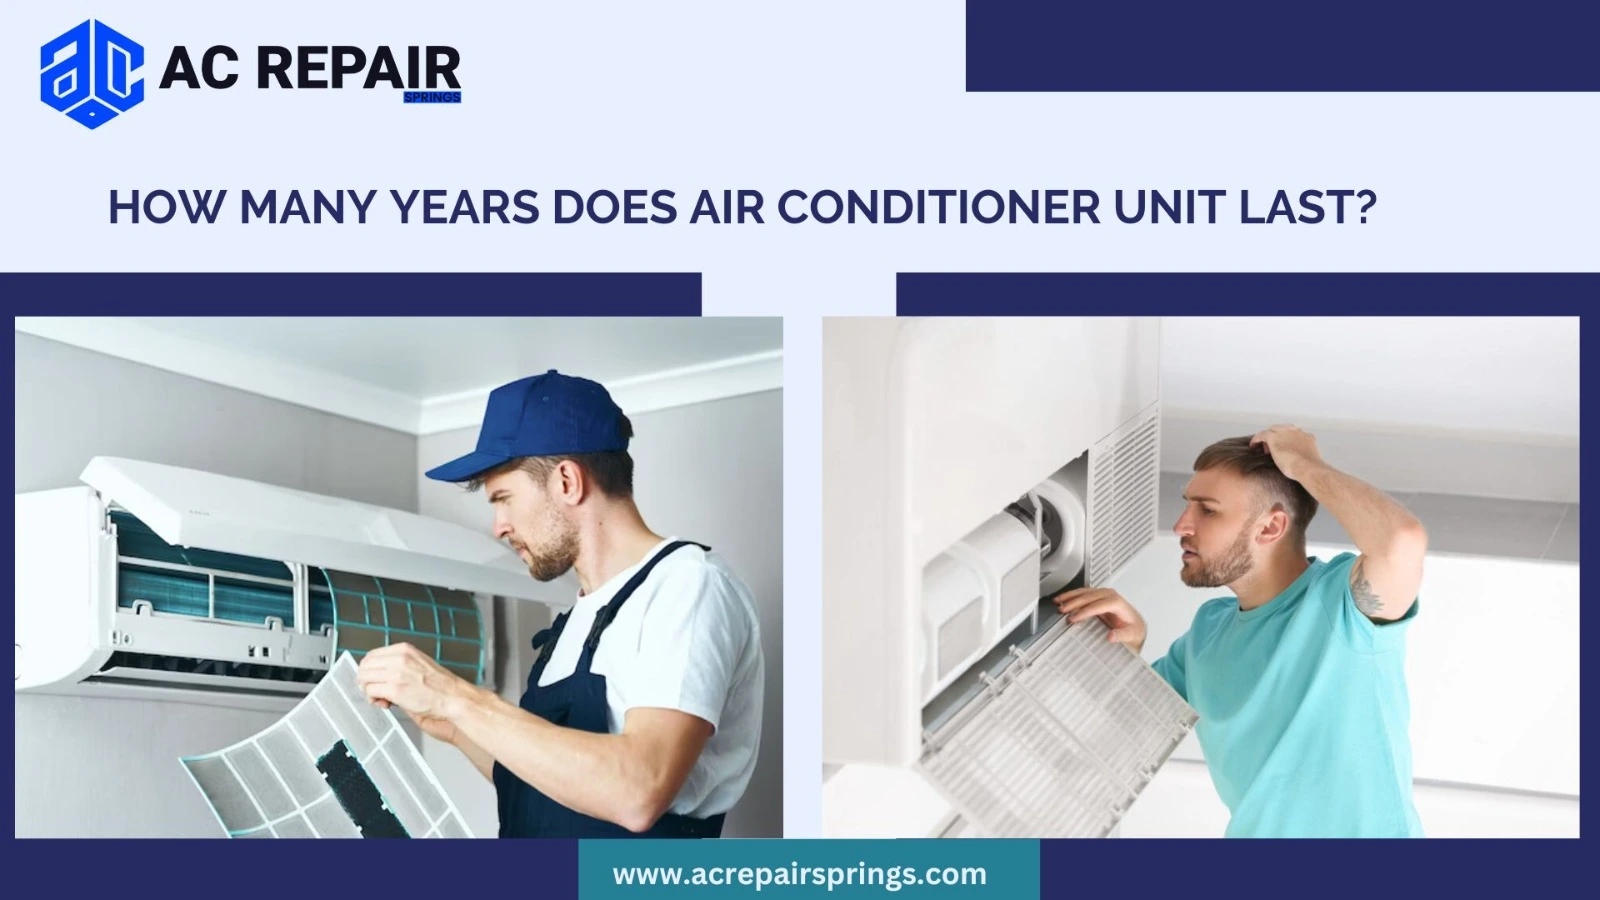 How Many Years Does Air Conditioner Unit Last?